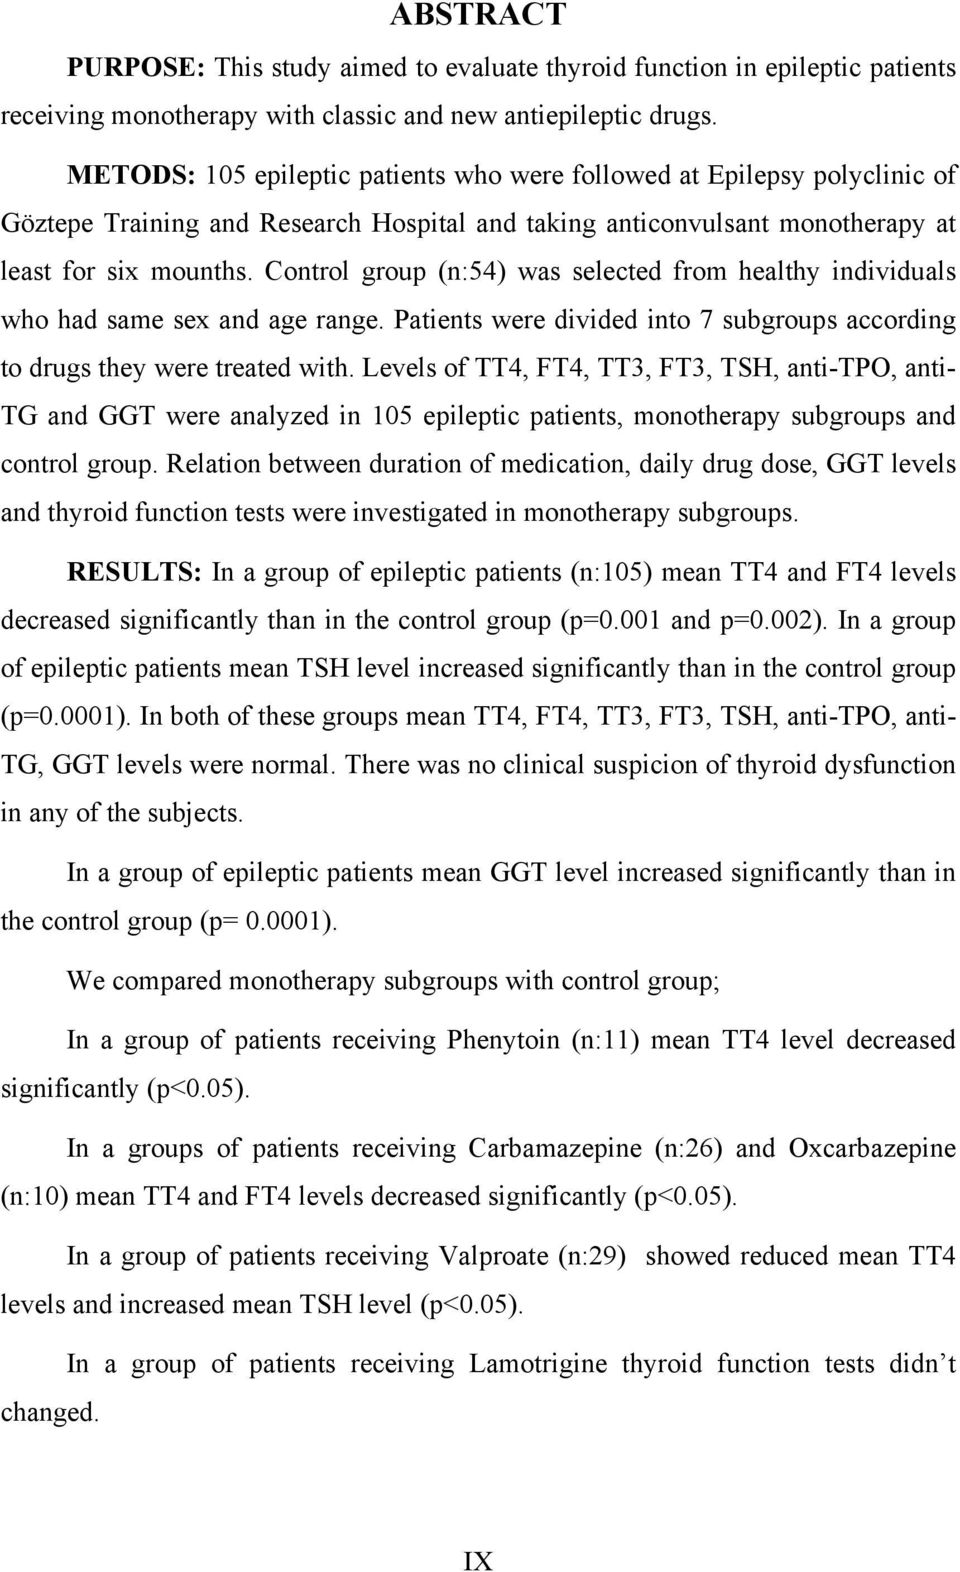 Control group (n:54) was selected from healthy individuals who had same sex and age range. Patients were divided into 7 subgroups according to drugs they were treated with.